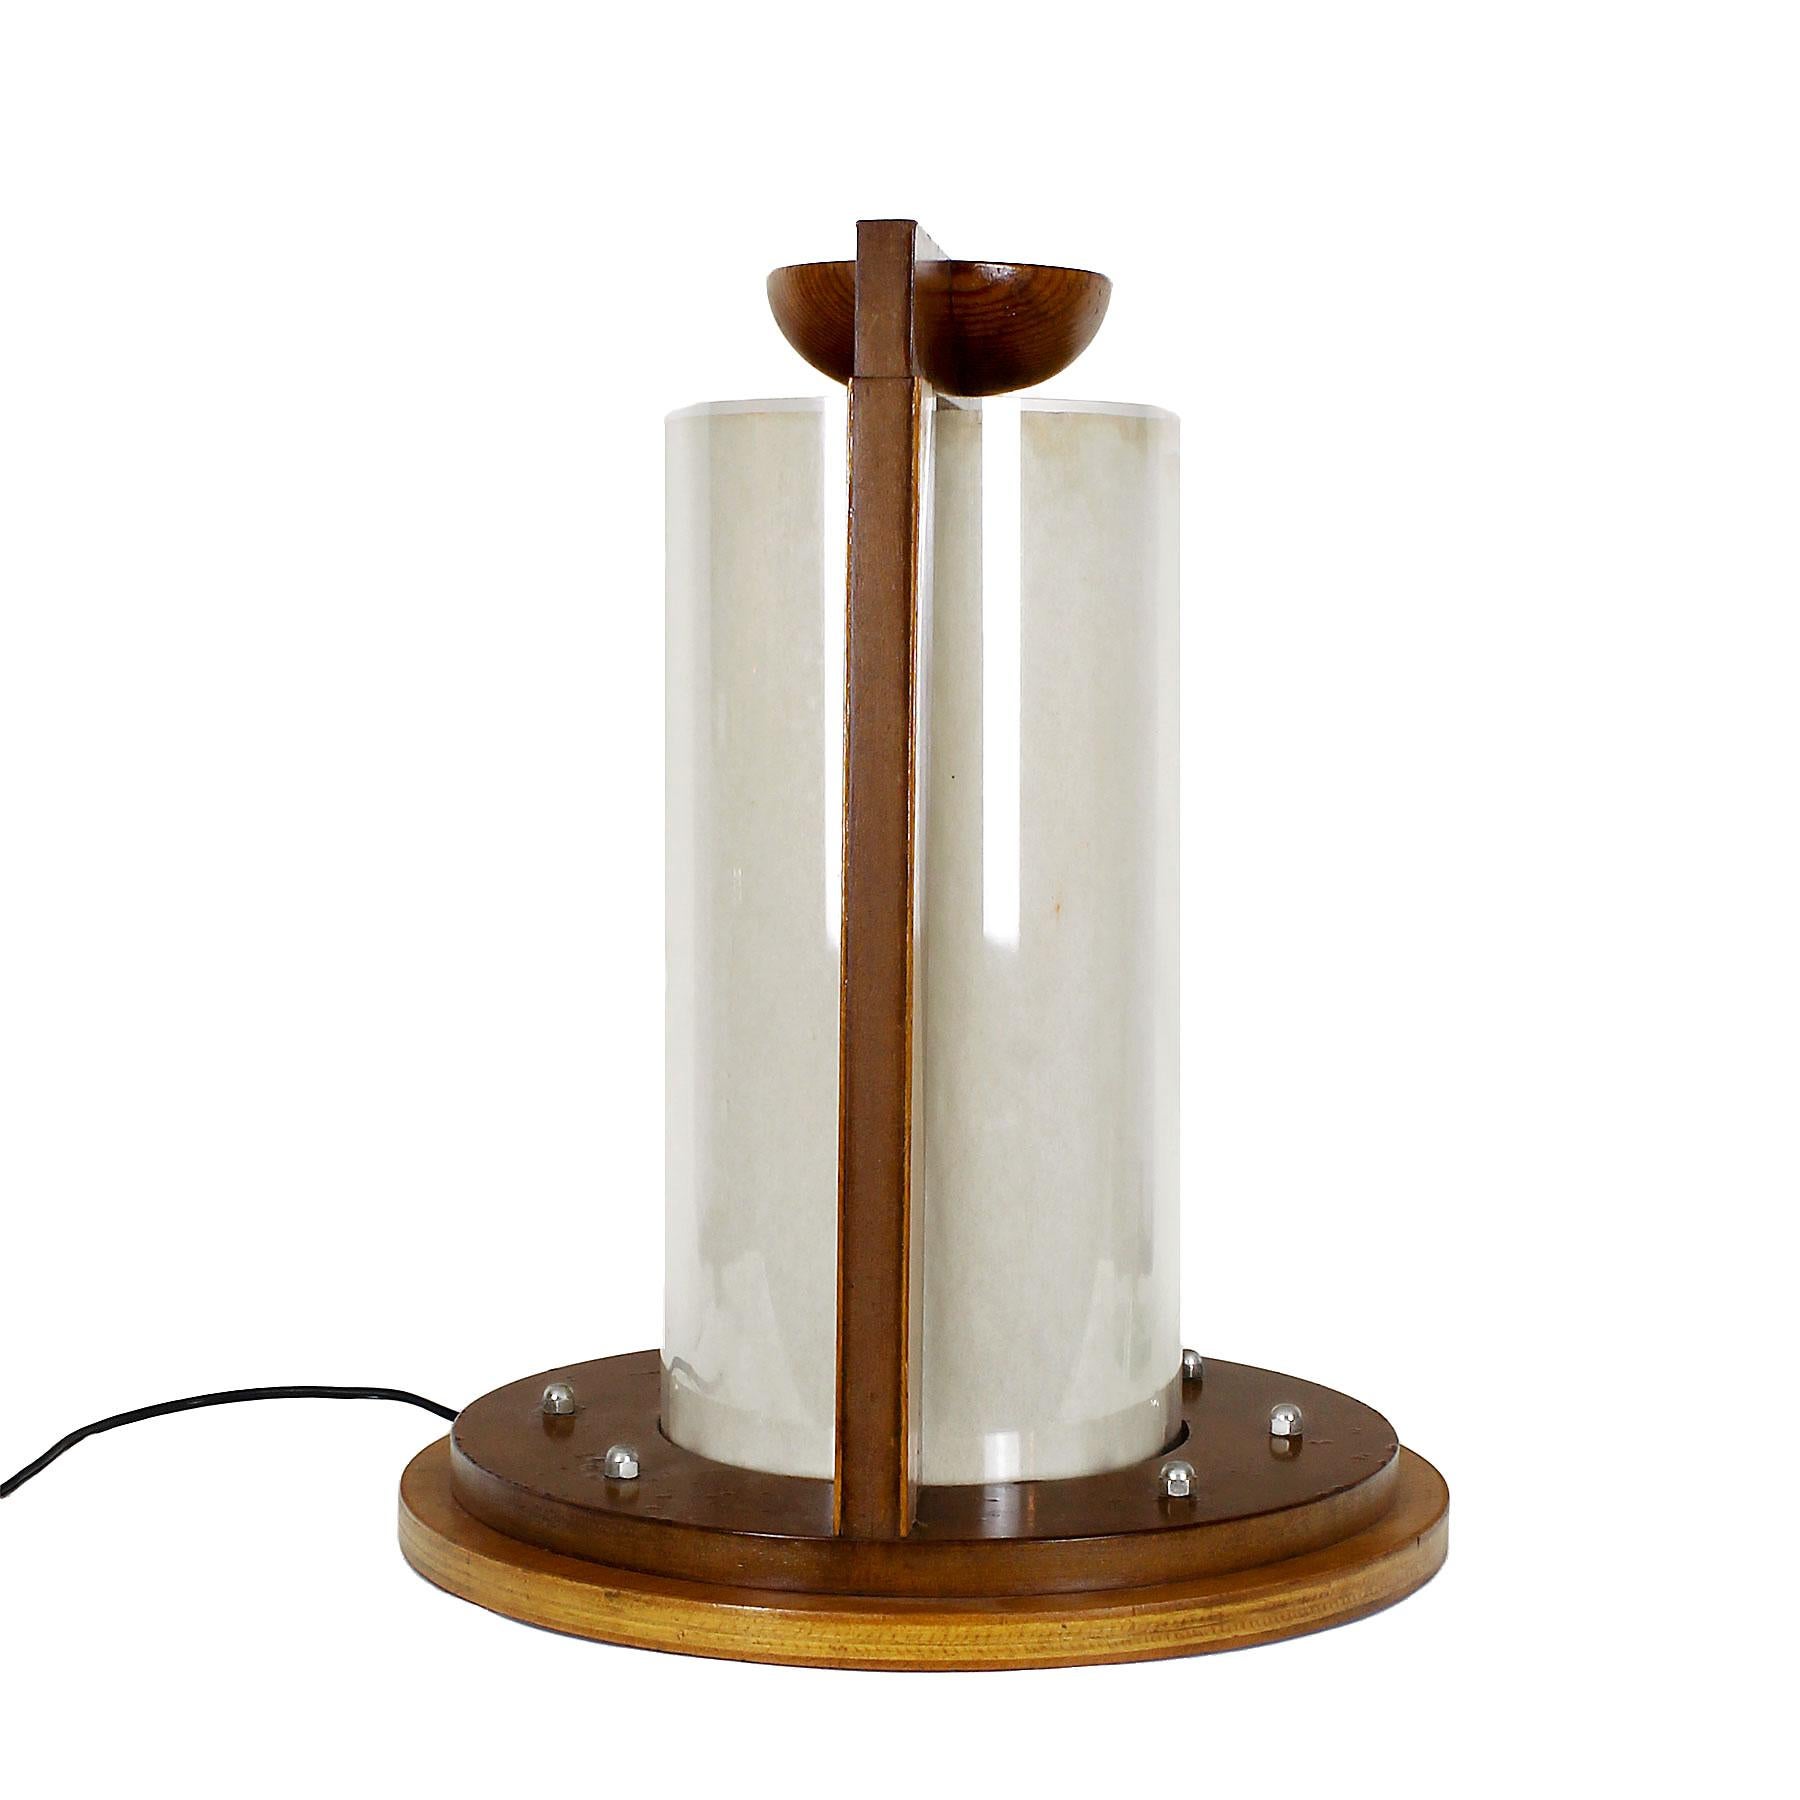 Table lamp, MDF with applications of beech and pine wood, central plexiglass cylinder with parchment paper inside. Three unique items made for a Night club in Figueras.
Spain, Figueras, c. 1980

